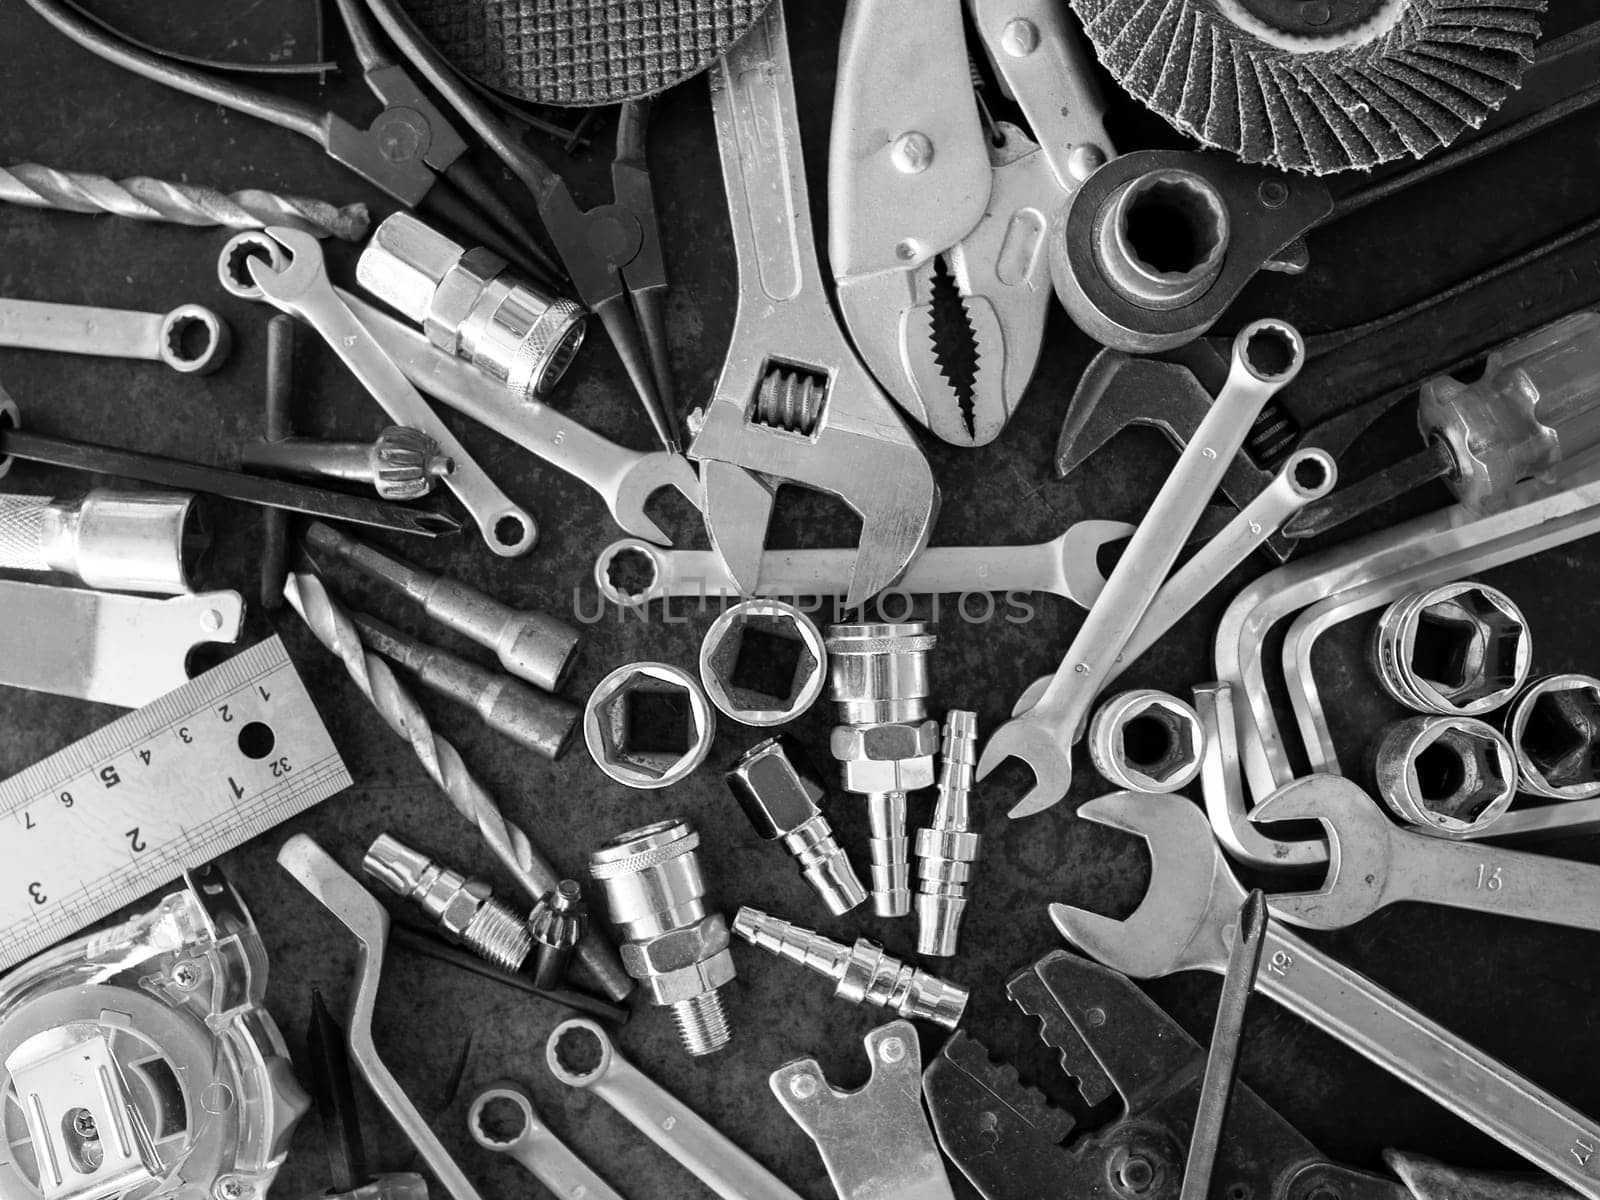 Hand tools consisting of wrenches, pliers, socket wrenches, laid out on old steel plate background.